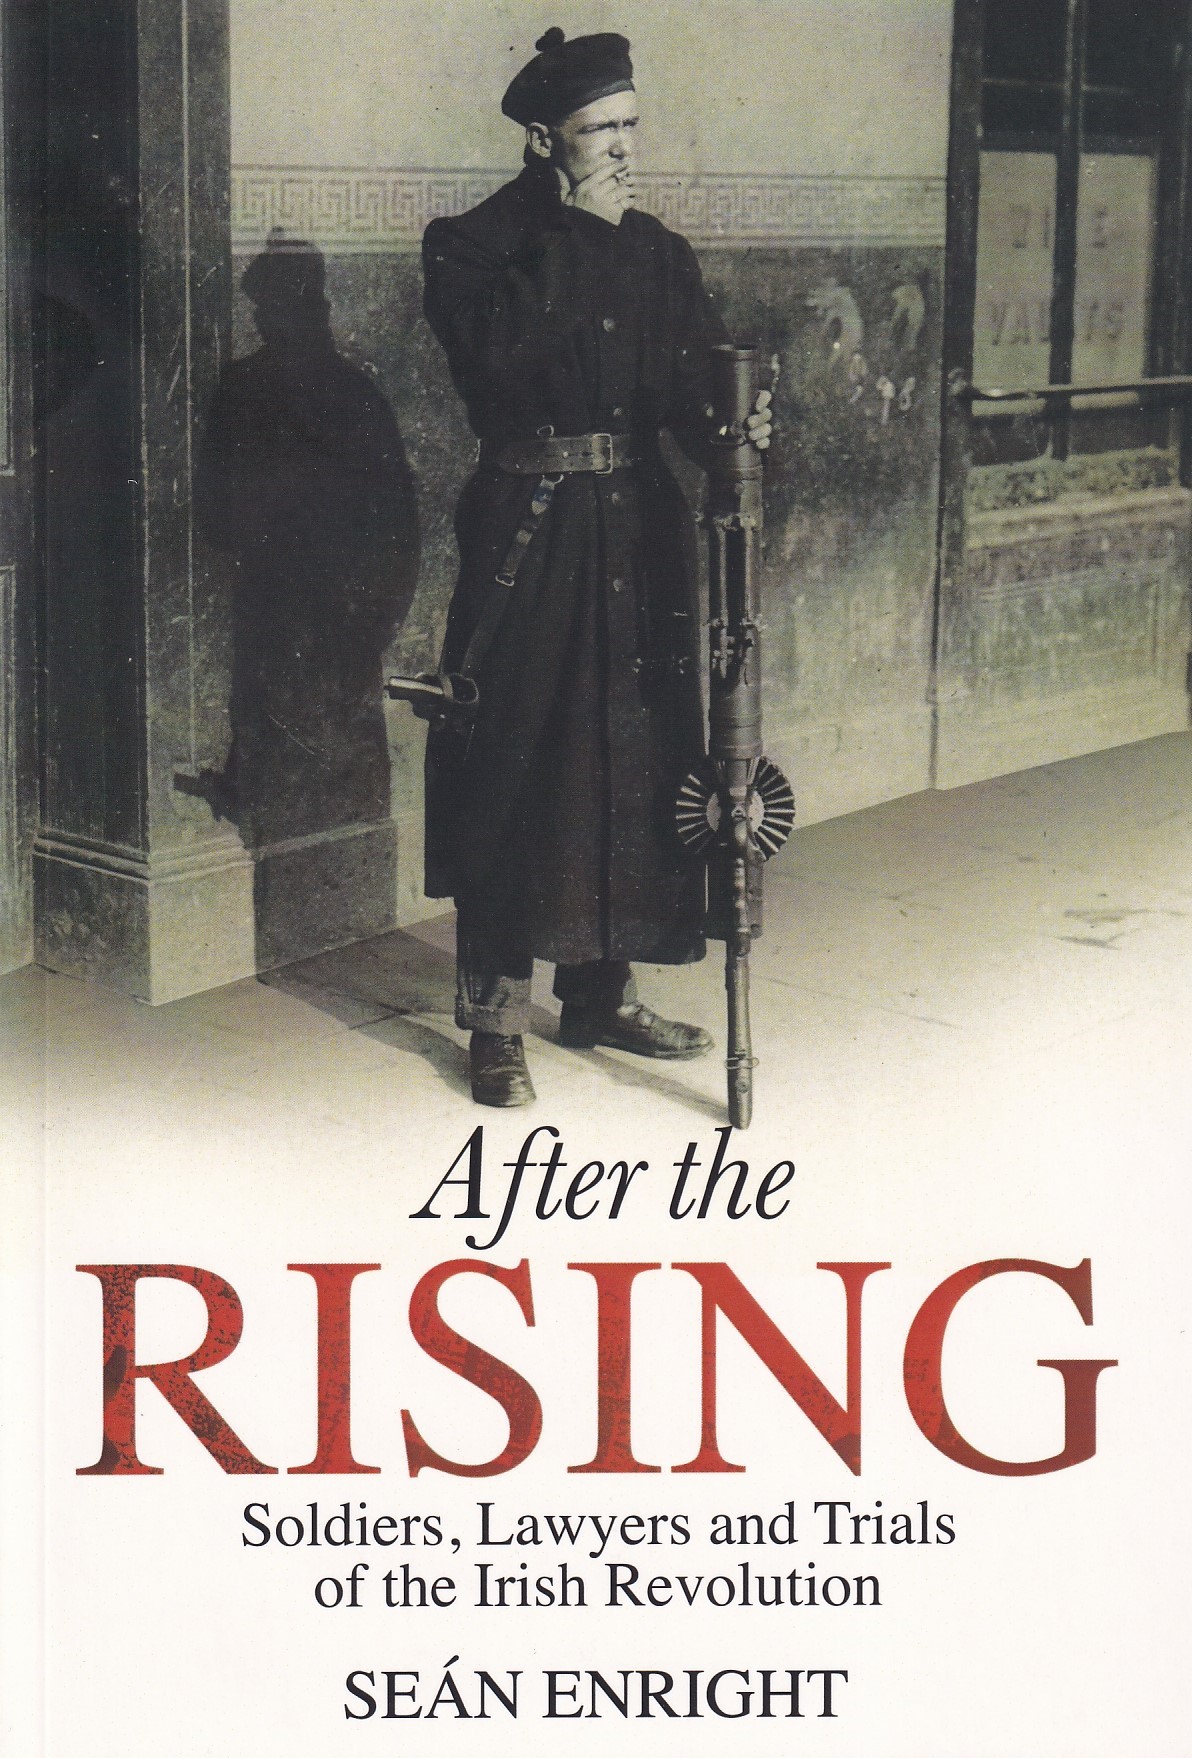 After the Rising: Soldiers, Lawyers and Trials of the Irish Revolution | Seán Enright | Charlie Byrne's